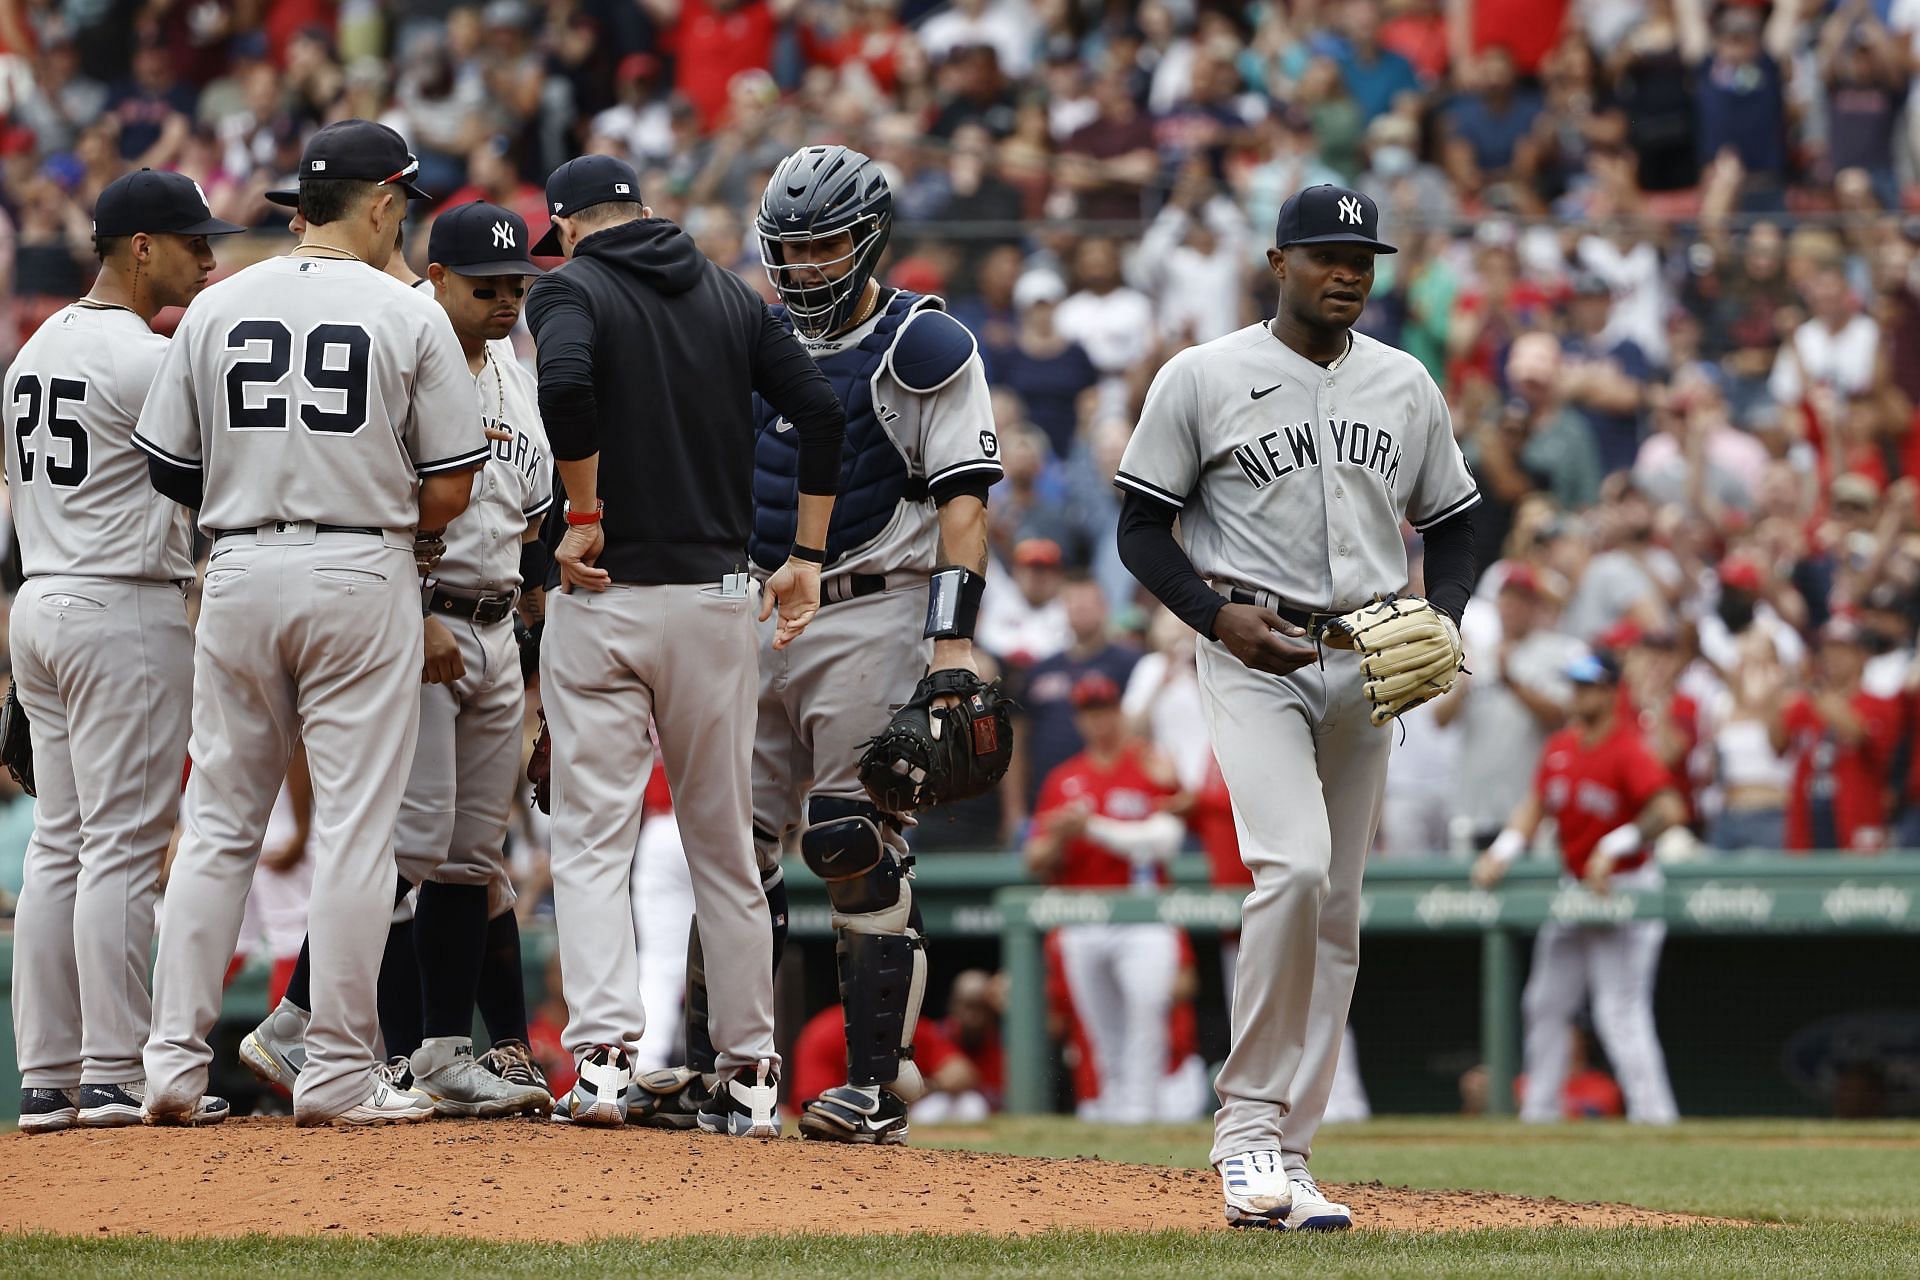 Pitcher Domingo German of the New York Yankees leaves the mound after giving up his first hit.